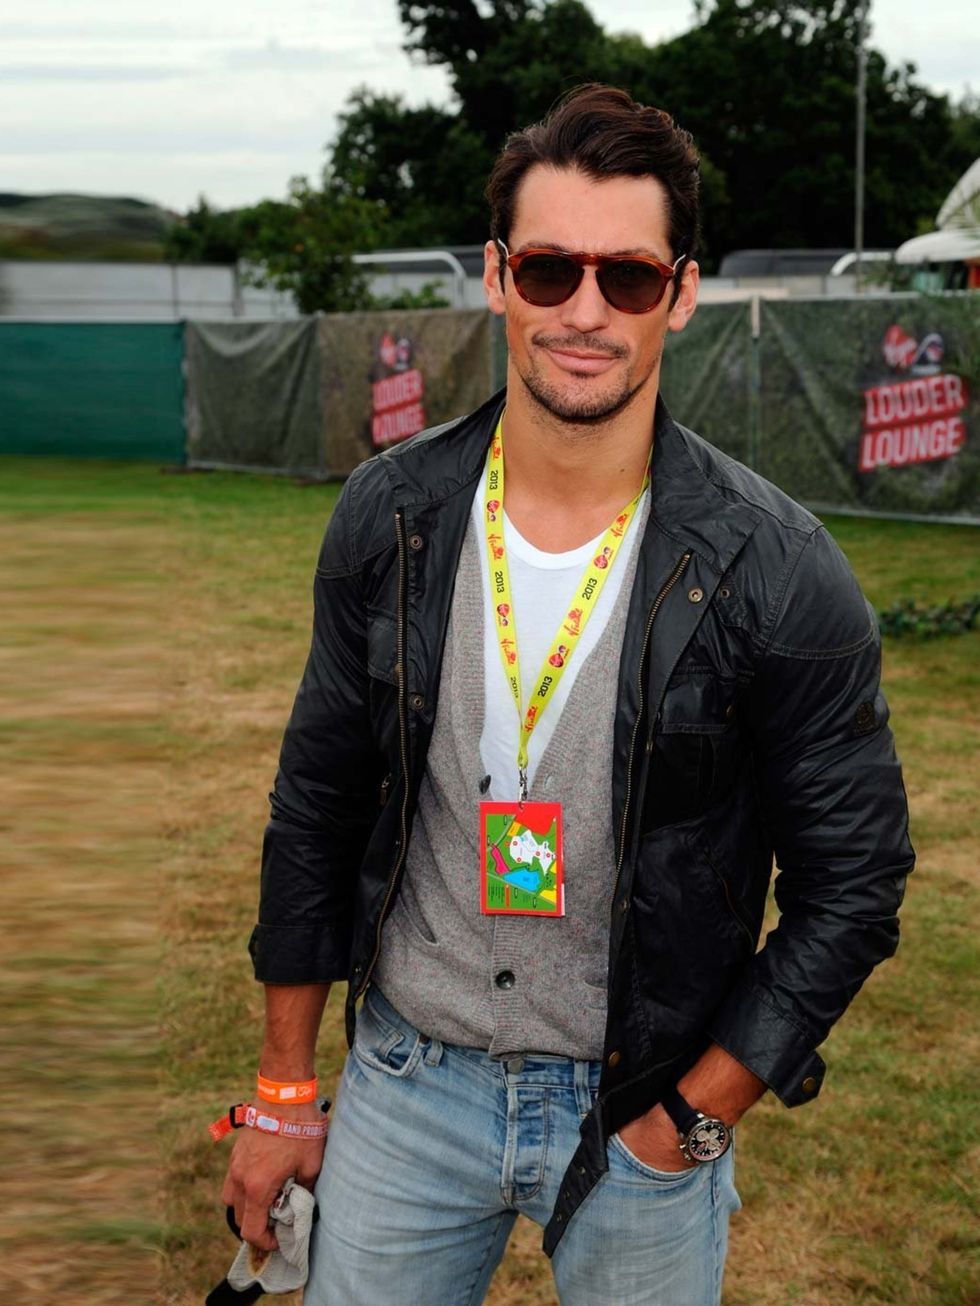 <p><a href="http://www.elleuk.com/star-style/celebrity-style-files/david-gandy-elle-man-of-the-week-blue-steel-dolce-and-gabbana-pictures-model">David Gandy</a> backstage at V Festival 2013.</p>